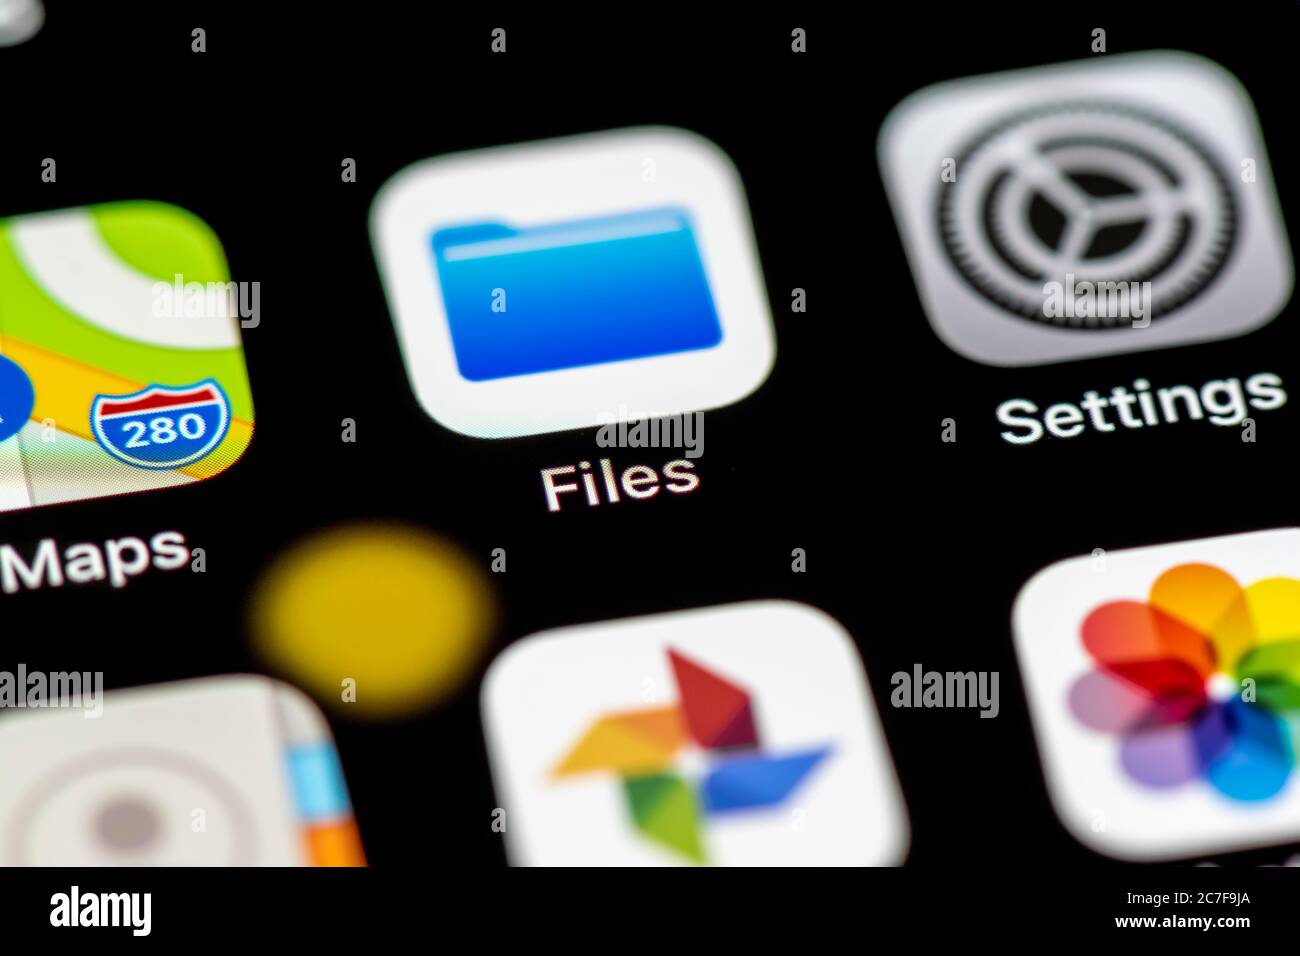 Files Icon, App Icons on a mobile phone display, iPhone, Smartphone, close-up Stock Photo